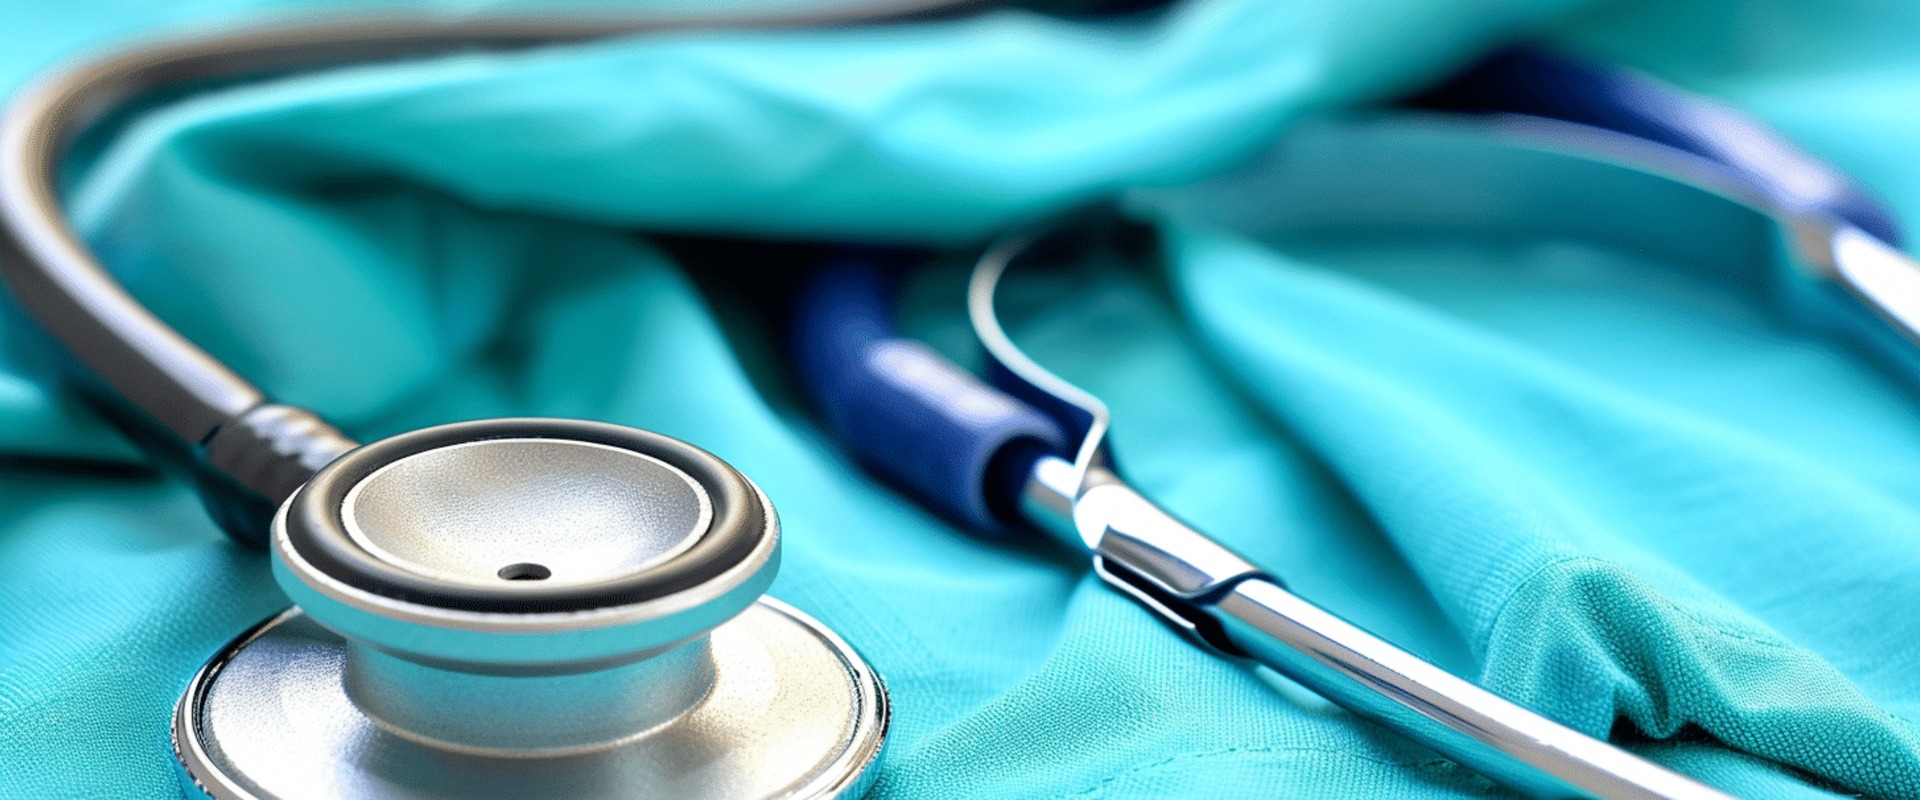 The Most Common Types of Medical Malpractice and How to Protect Your Rights